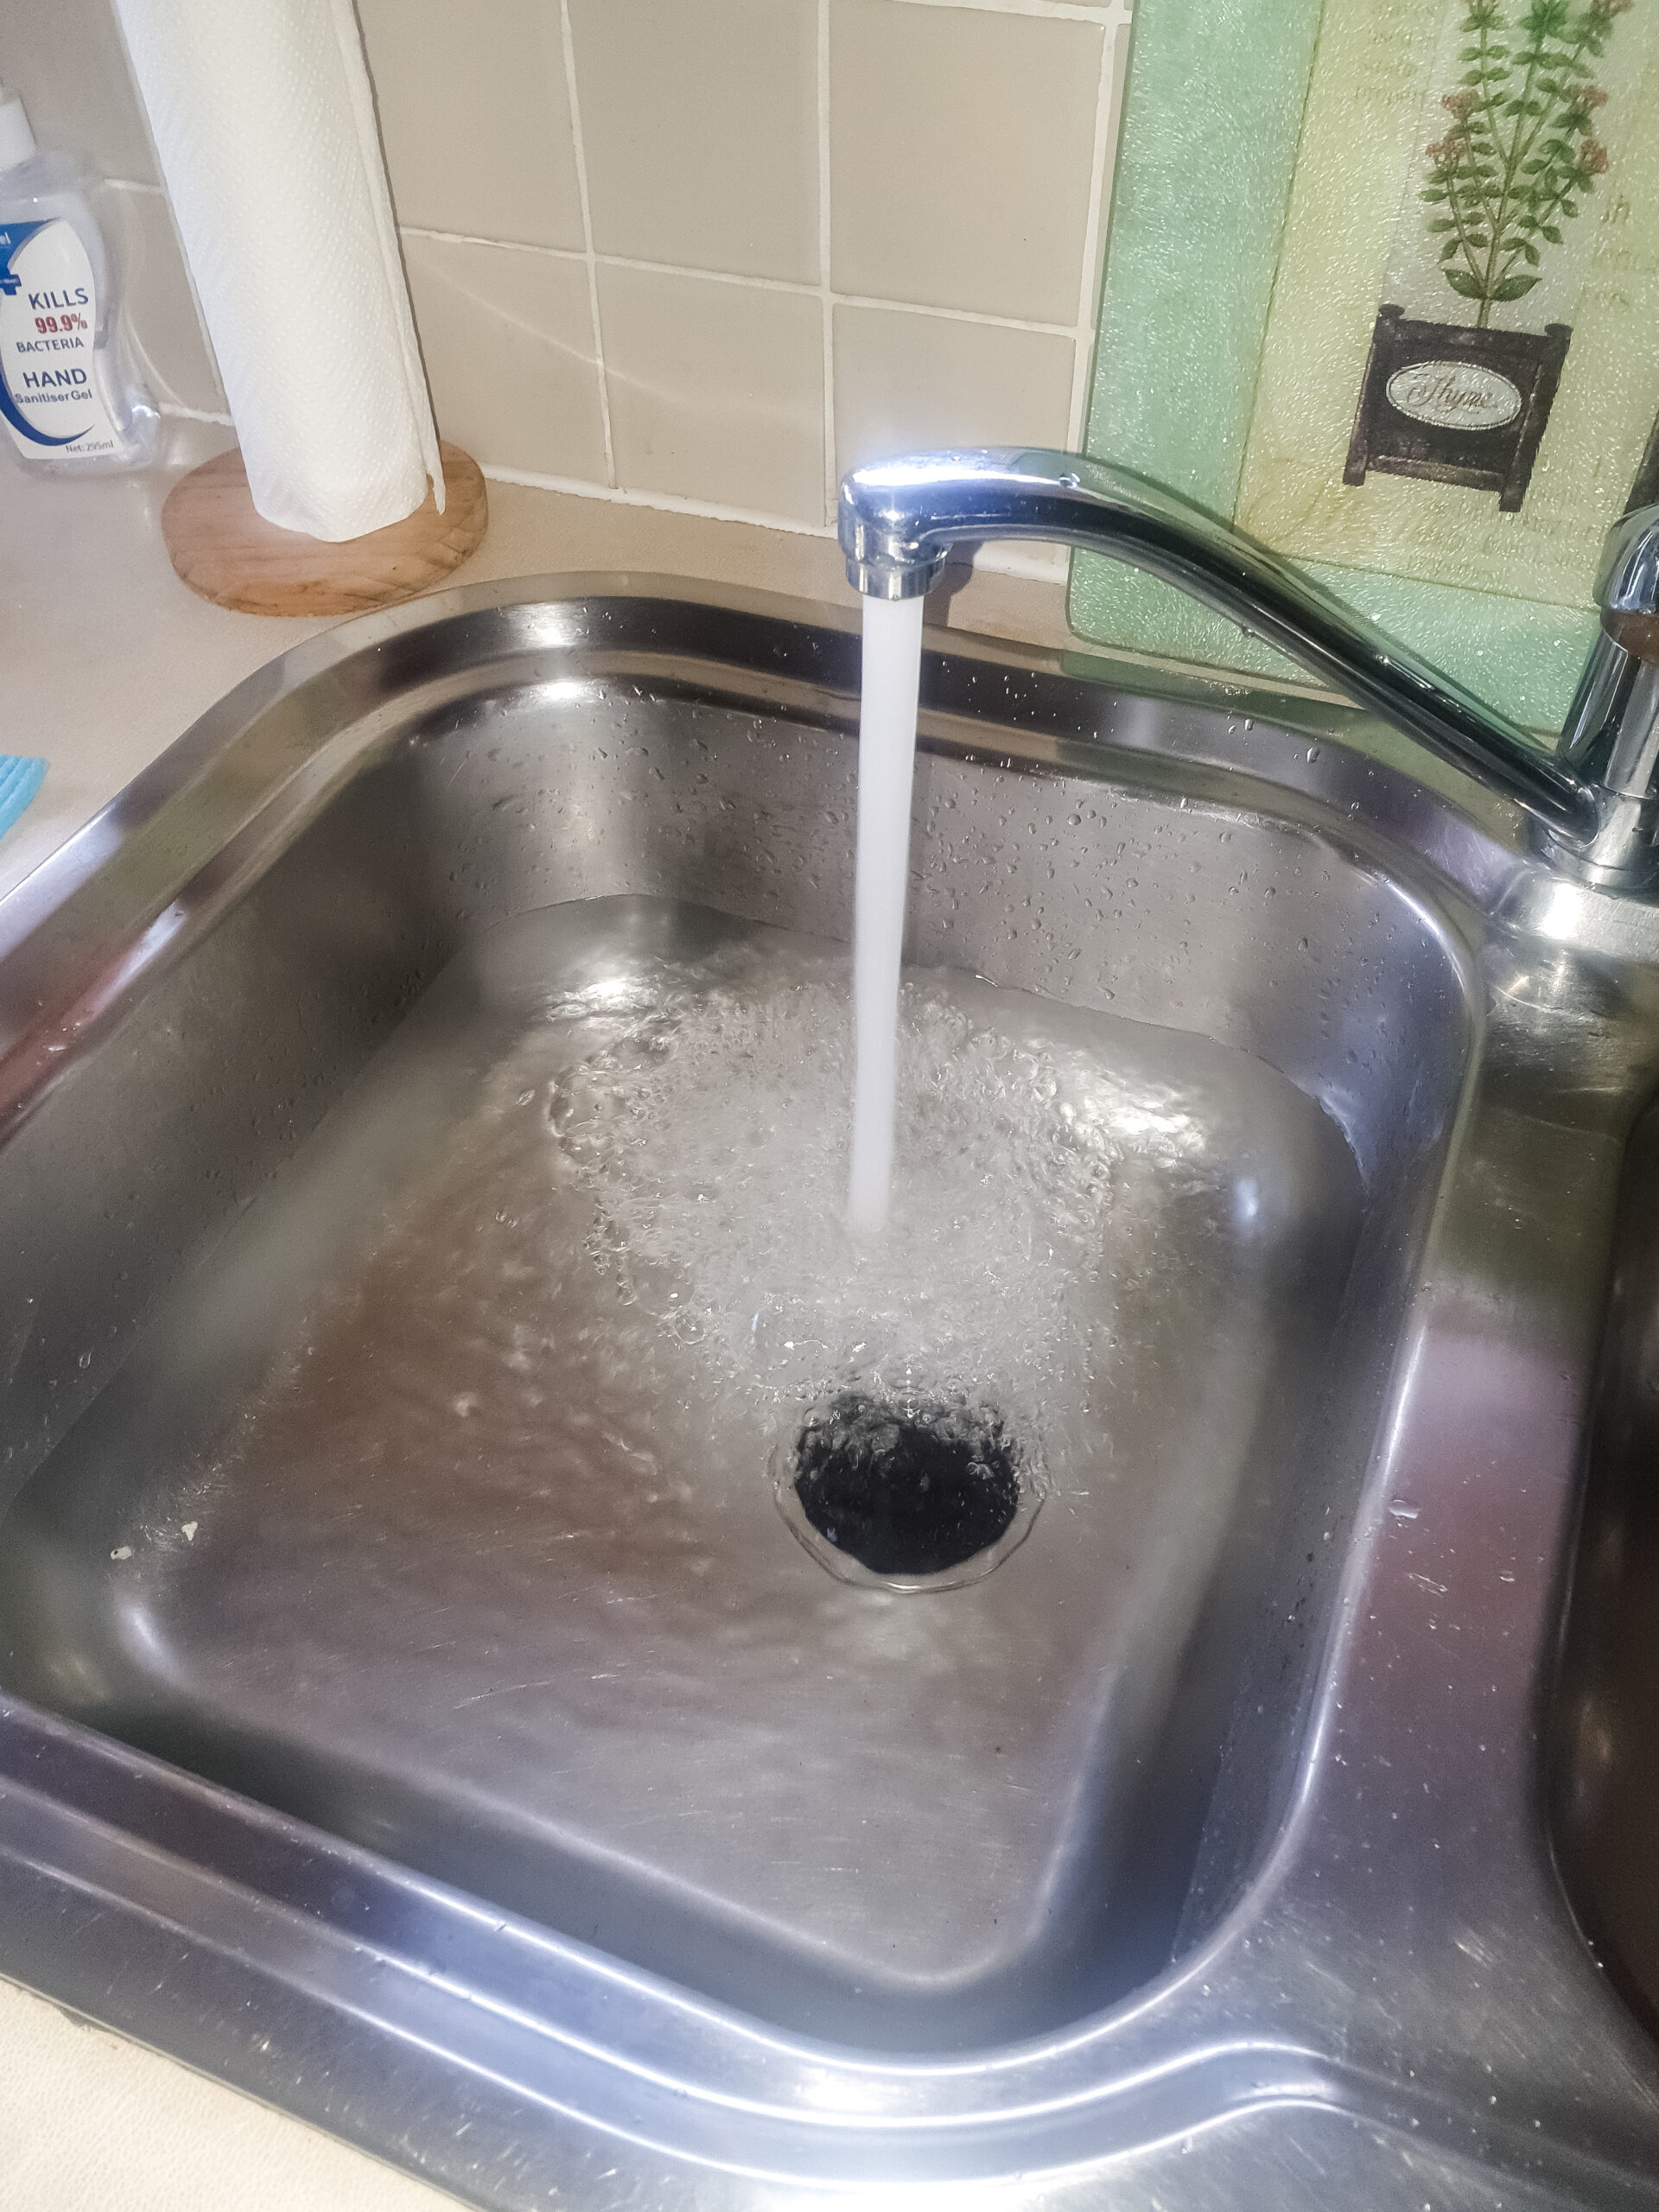 clogged sink and leaking tap services in Illawarra